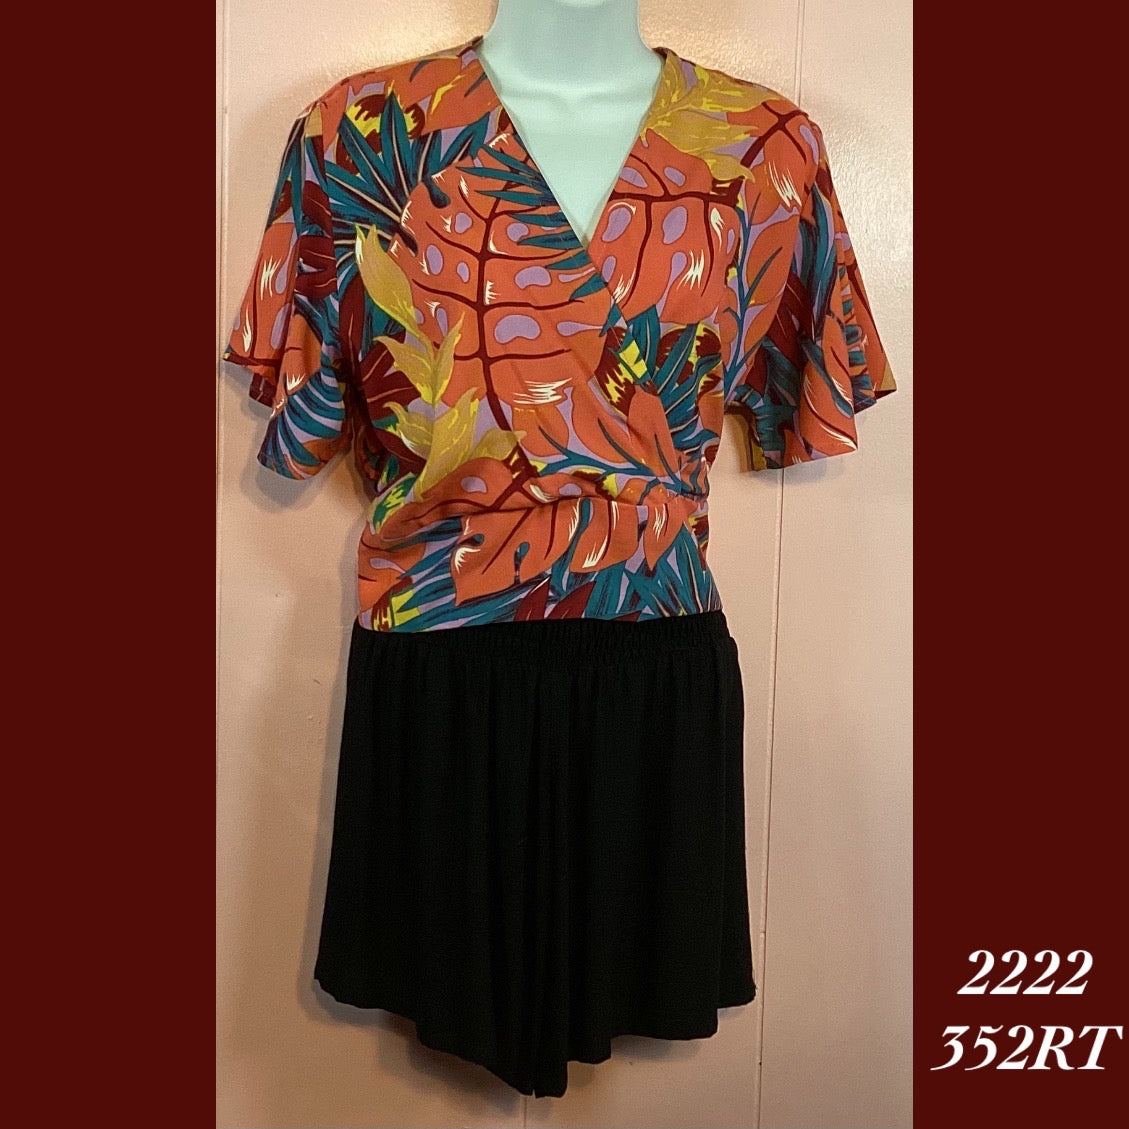 2222 - 352RT , Bell sleeved cross front top